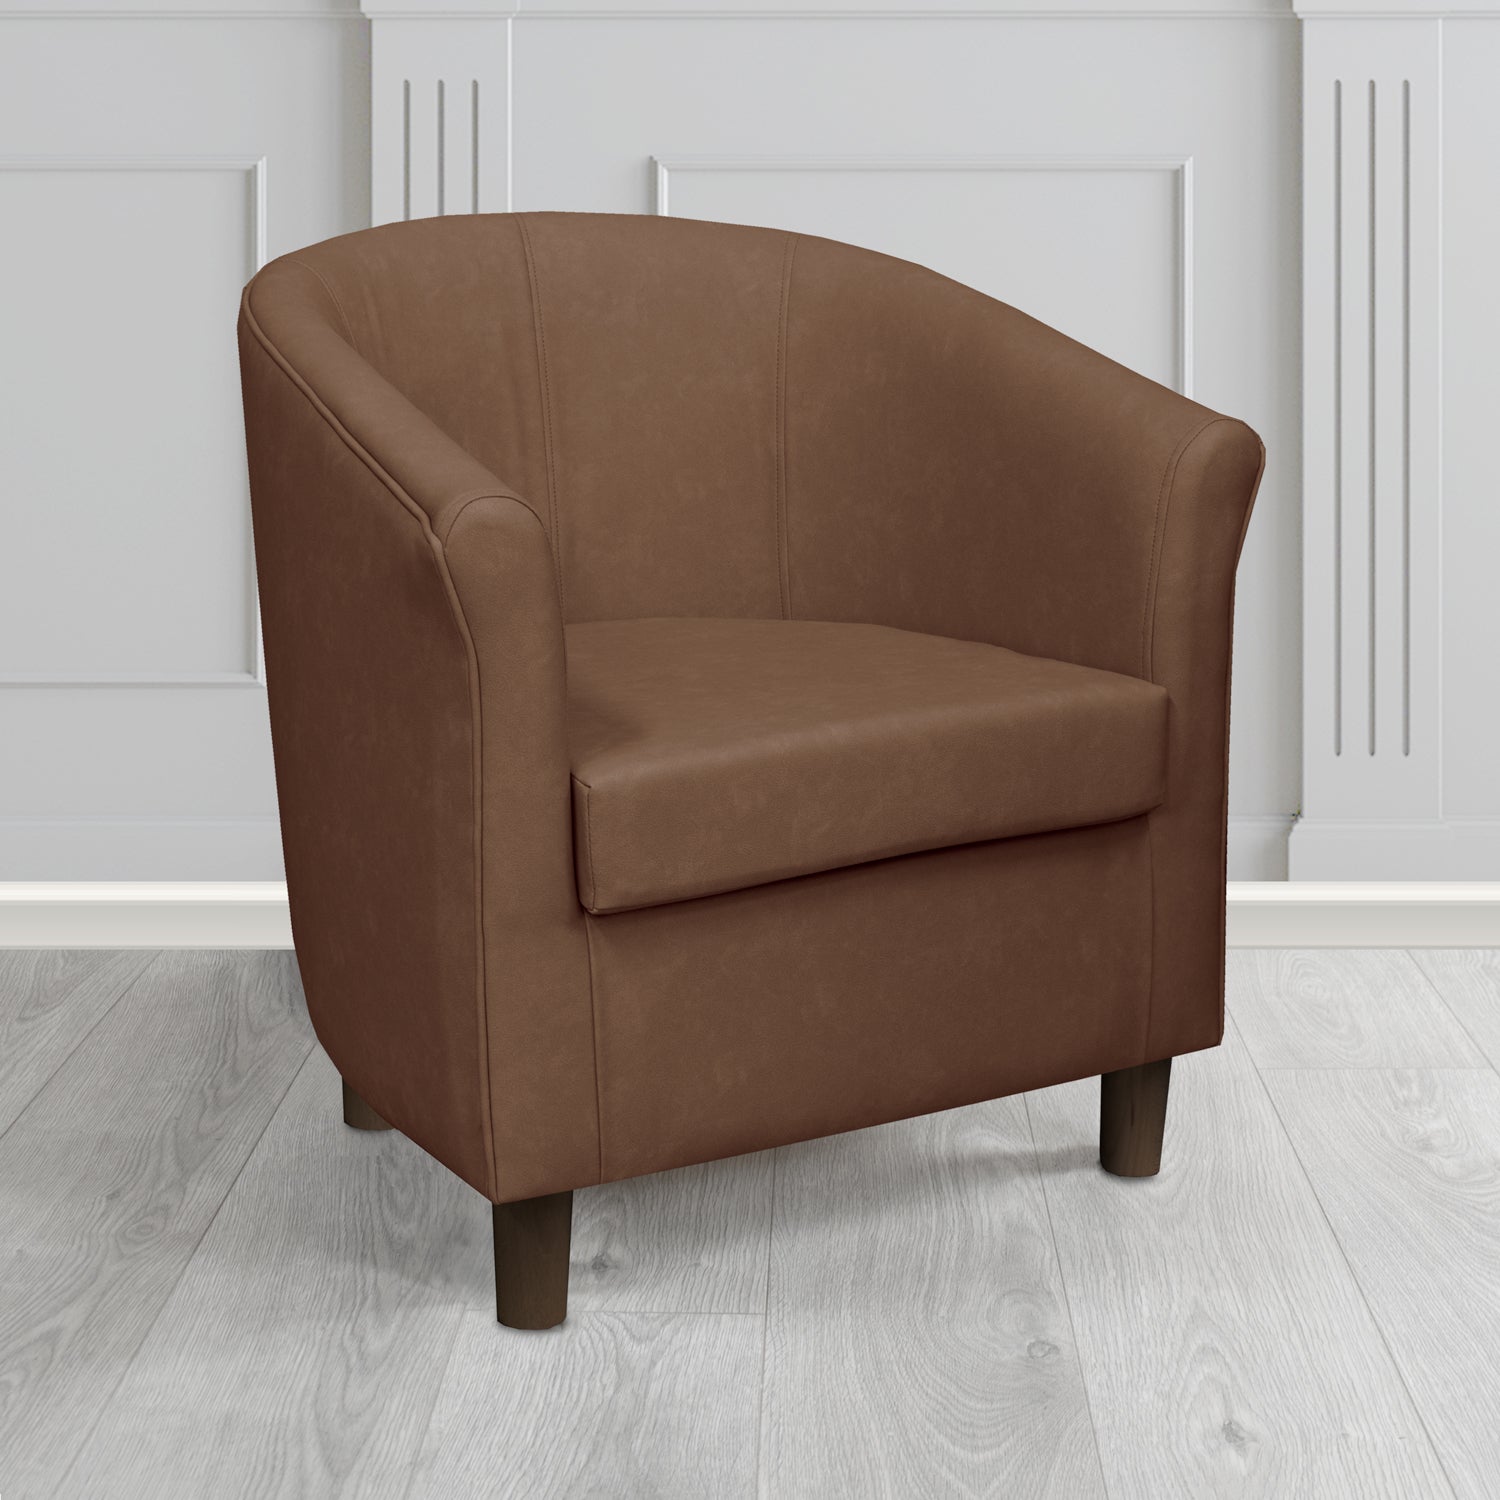 Tuscany Tub Chair in Infiniti Tan INF1850 Antimicrobial Crib 5 Faux Leather - The Tub Chair Shop